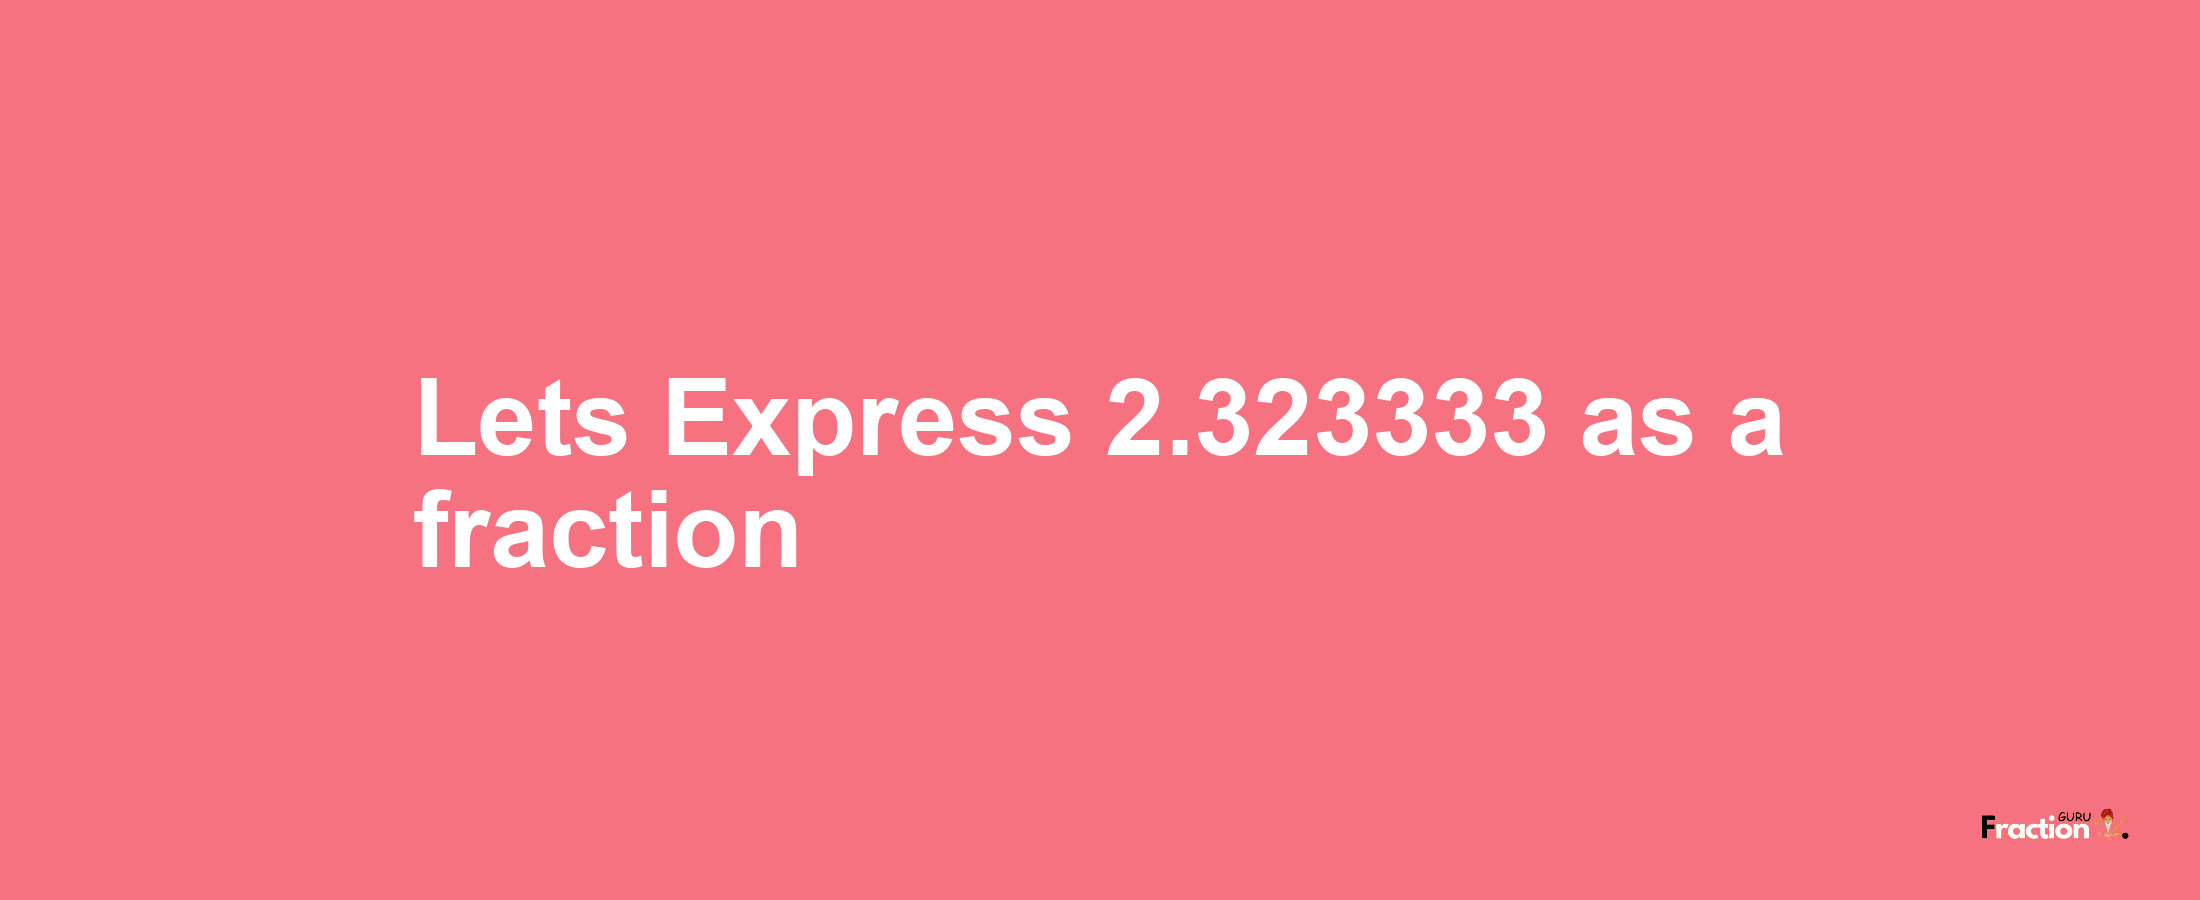 Lets Express 2.323333 as afraction